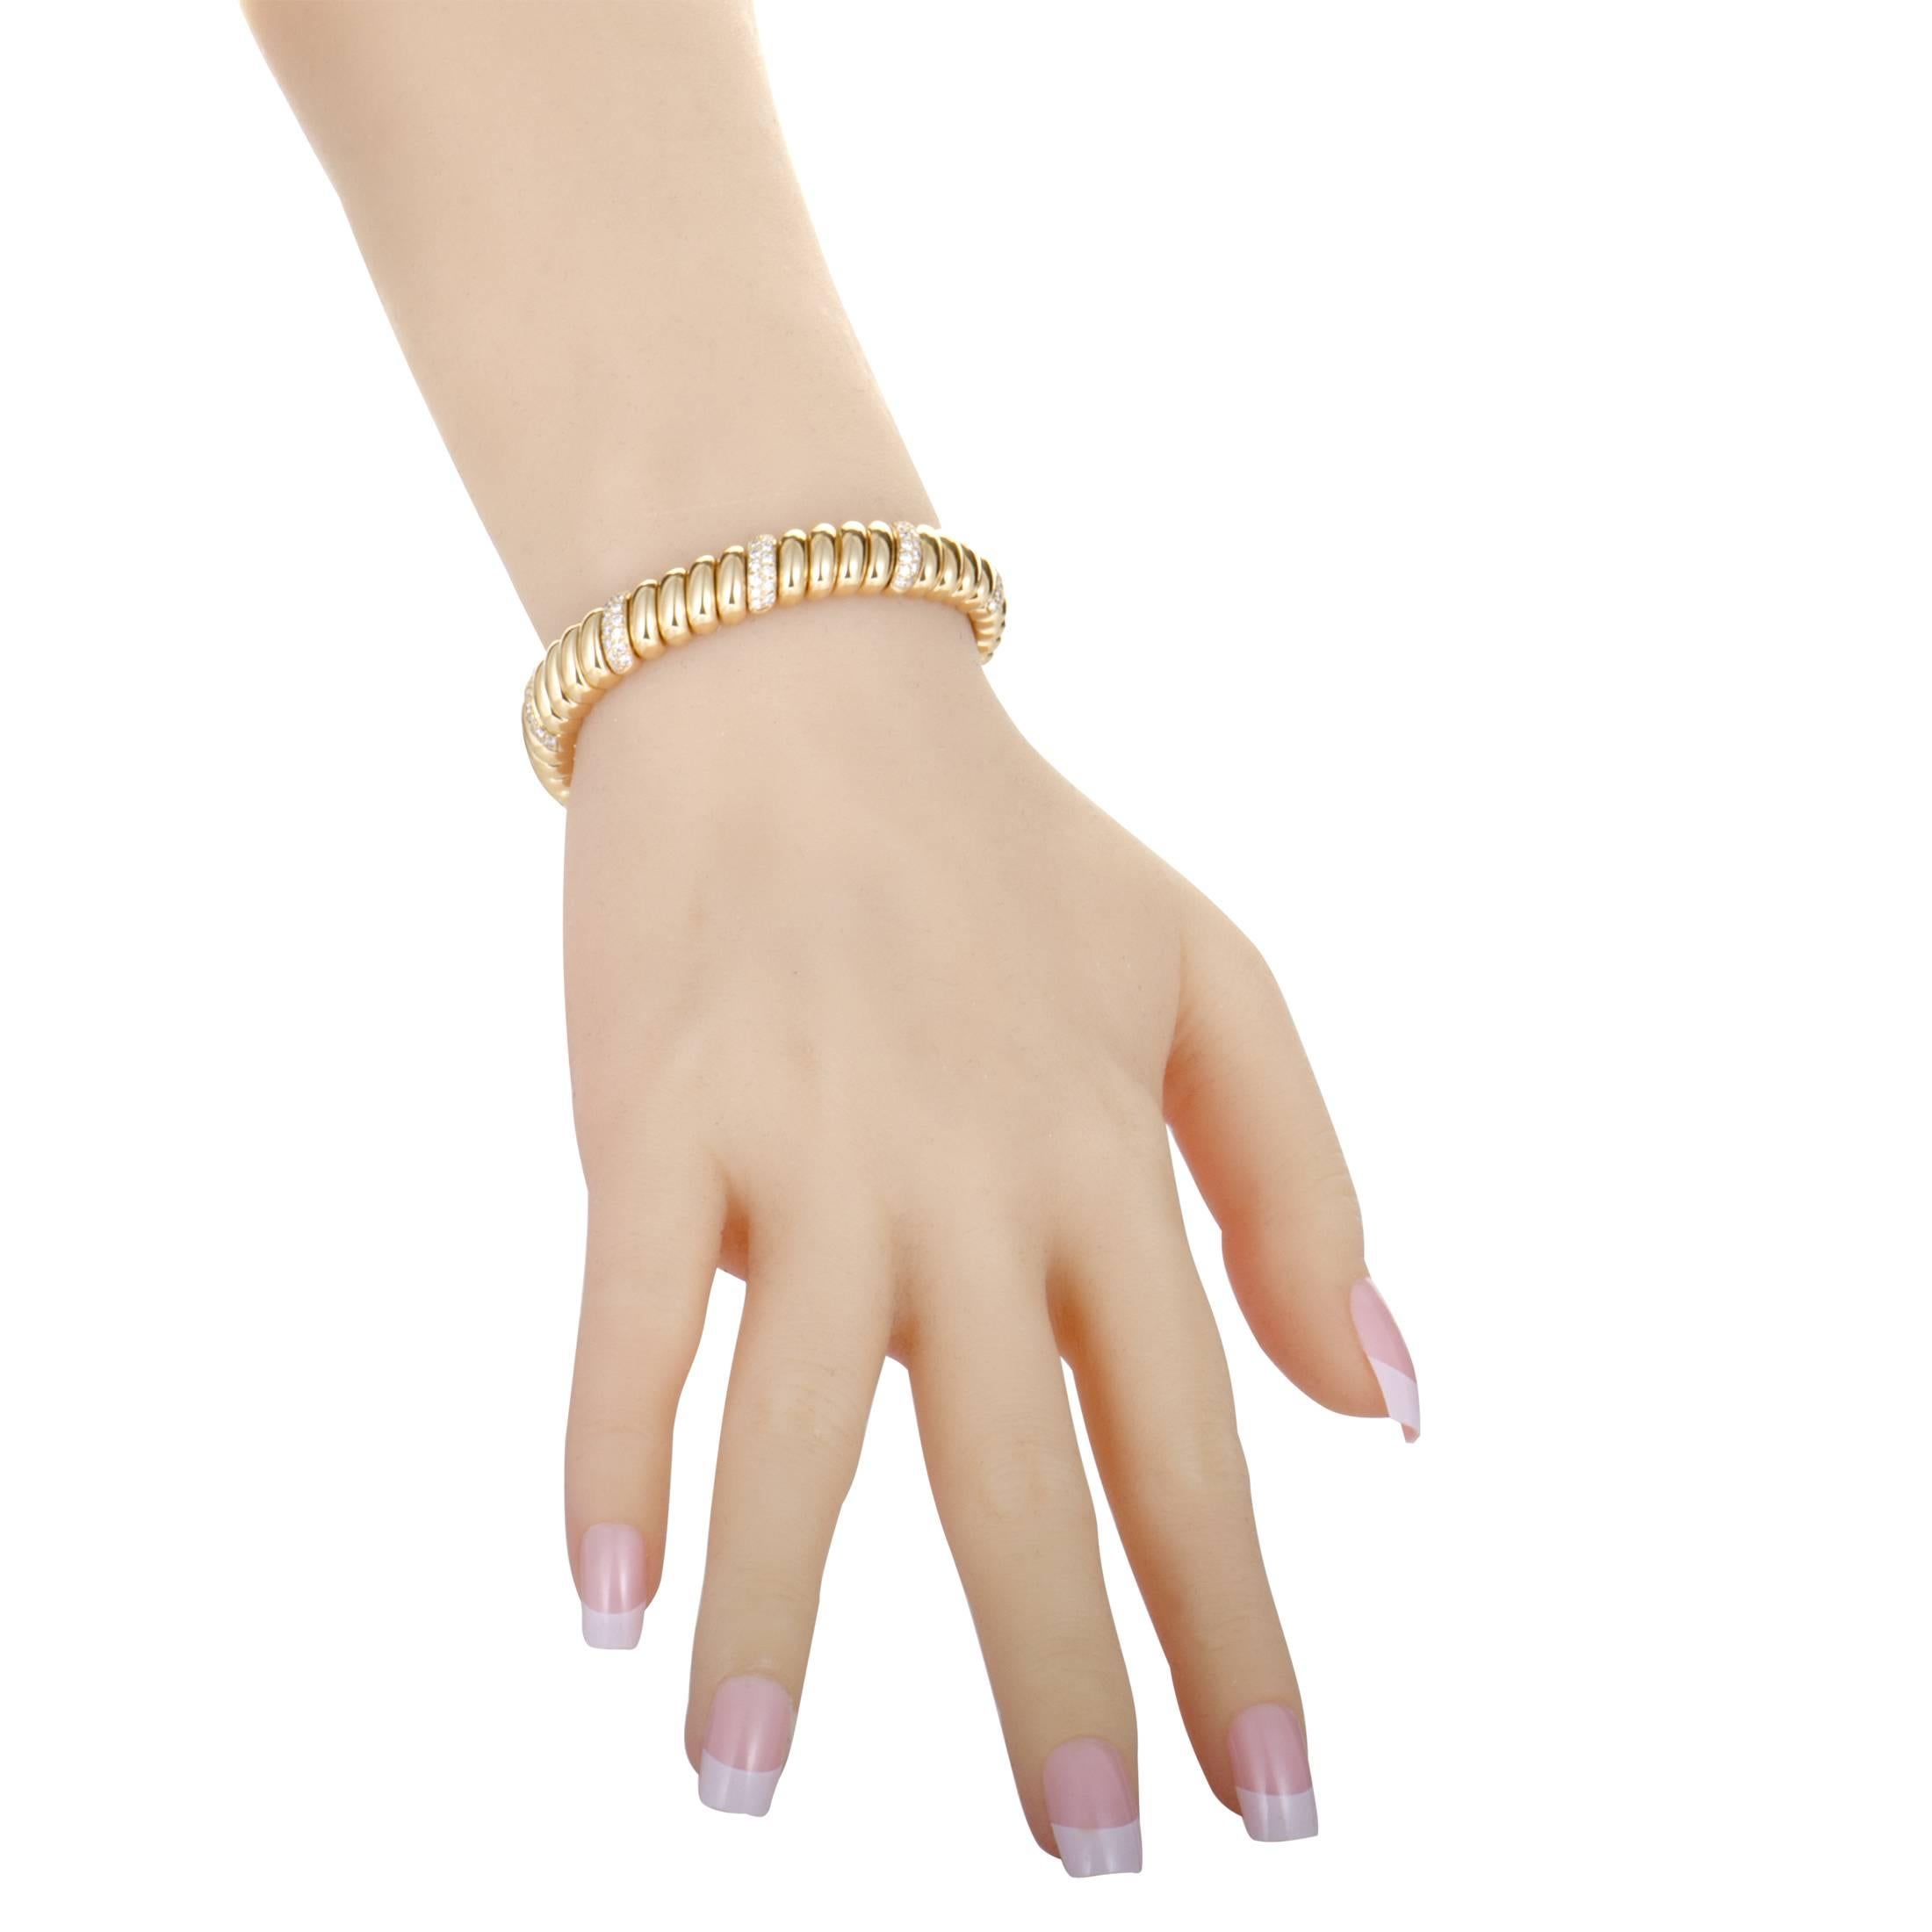 This vintage piece from Cartier features a wonderfully classy design complemented with gorgeous diamond decor, and offers a look of absolute prestige and elegance. The bracelet is made of 18K yellow gold and boasts a total of 1.96 carats of